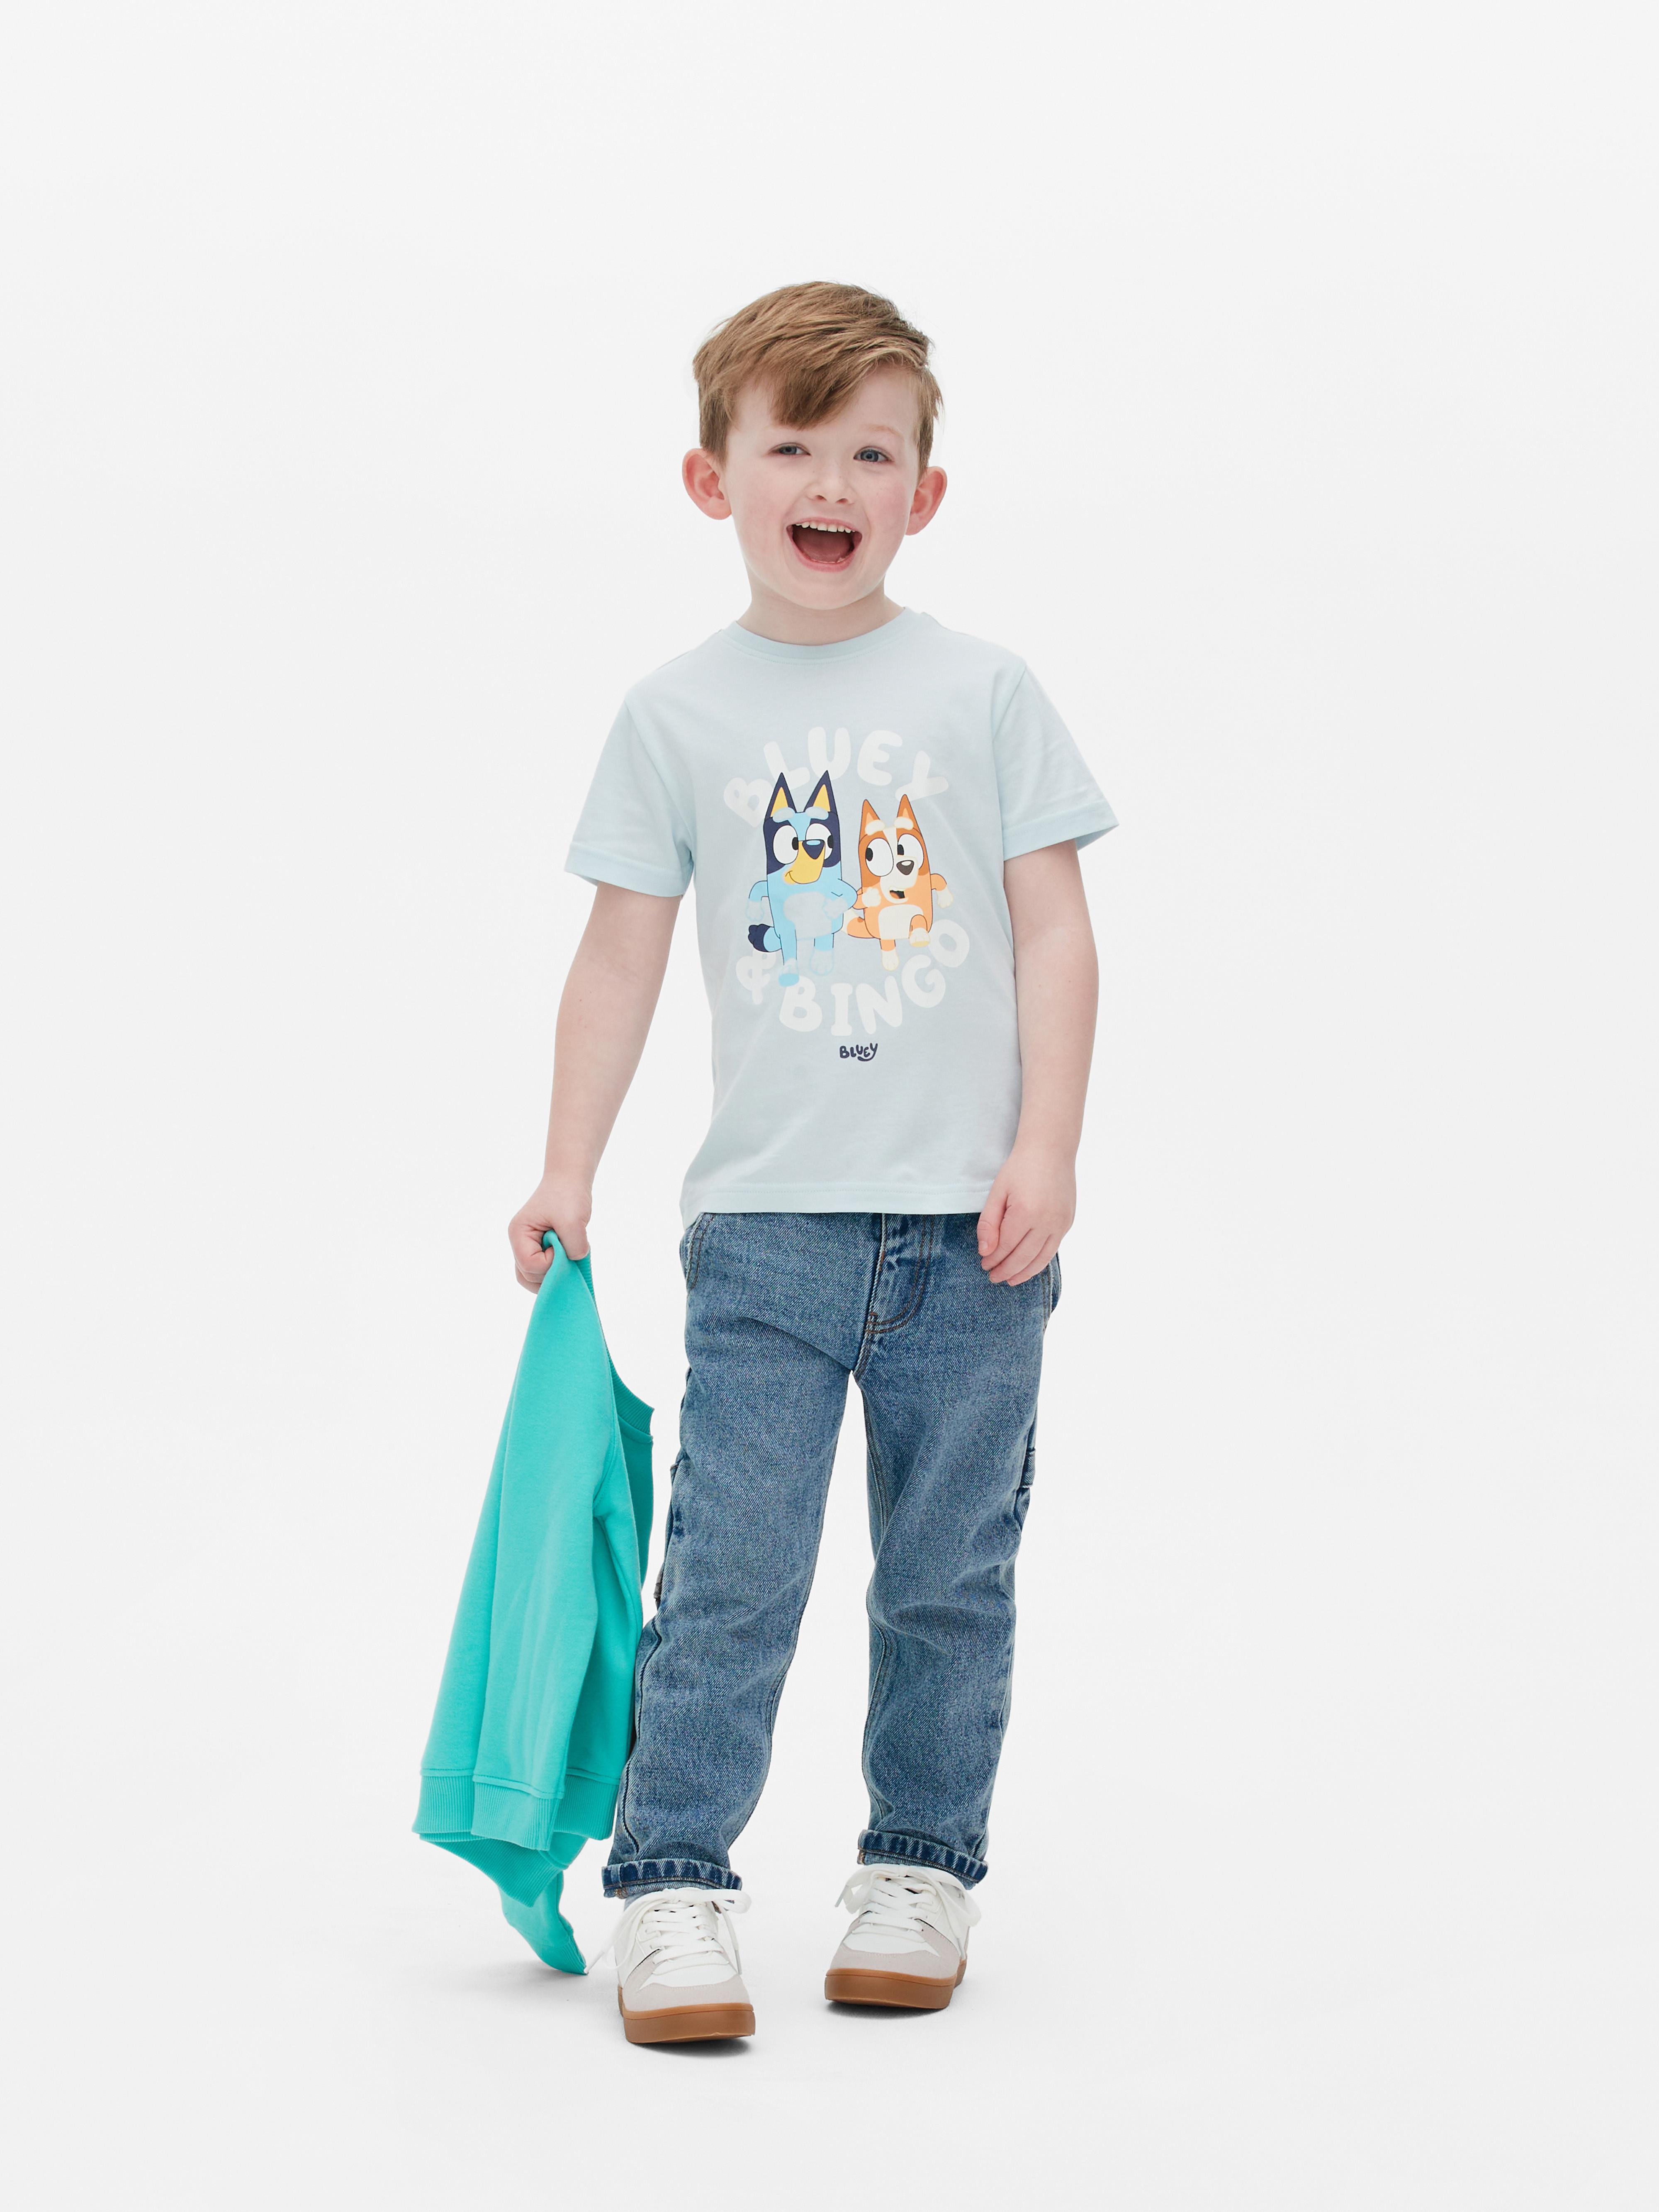 Bluey Boys' T-Shirt : : Clothing, Shoes & Accessories